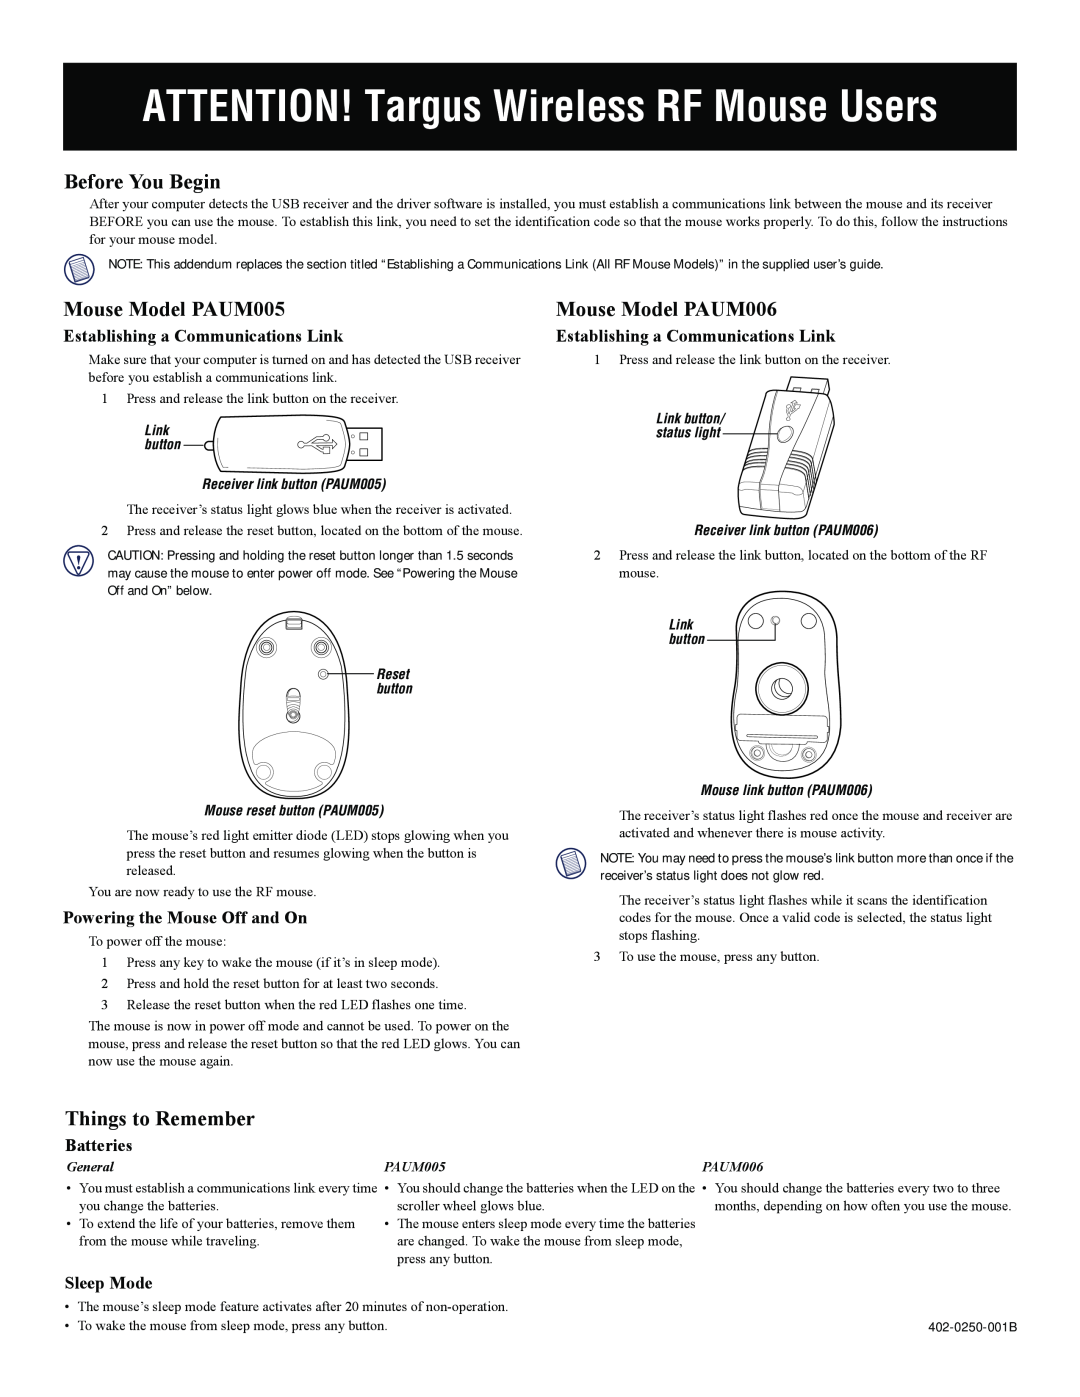 Targus manual ATTENTION! Targus Wireless RF Mouse Users, Before You Begin, Mouse Model PAUM005, Things to Remember 